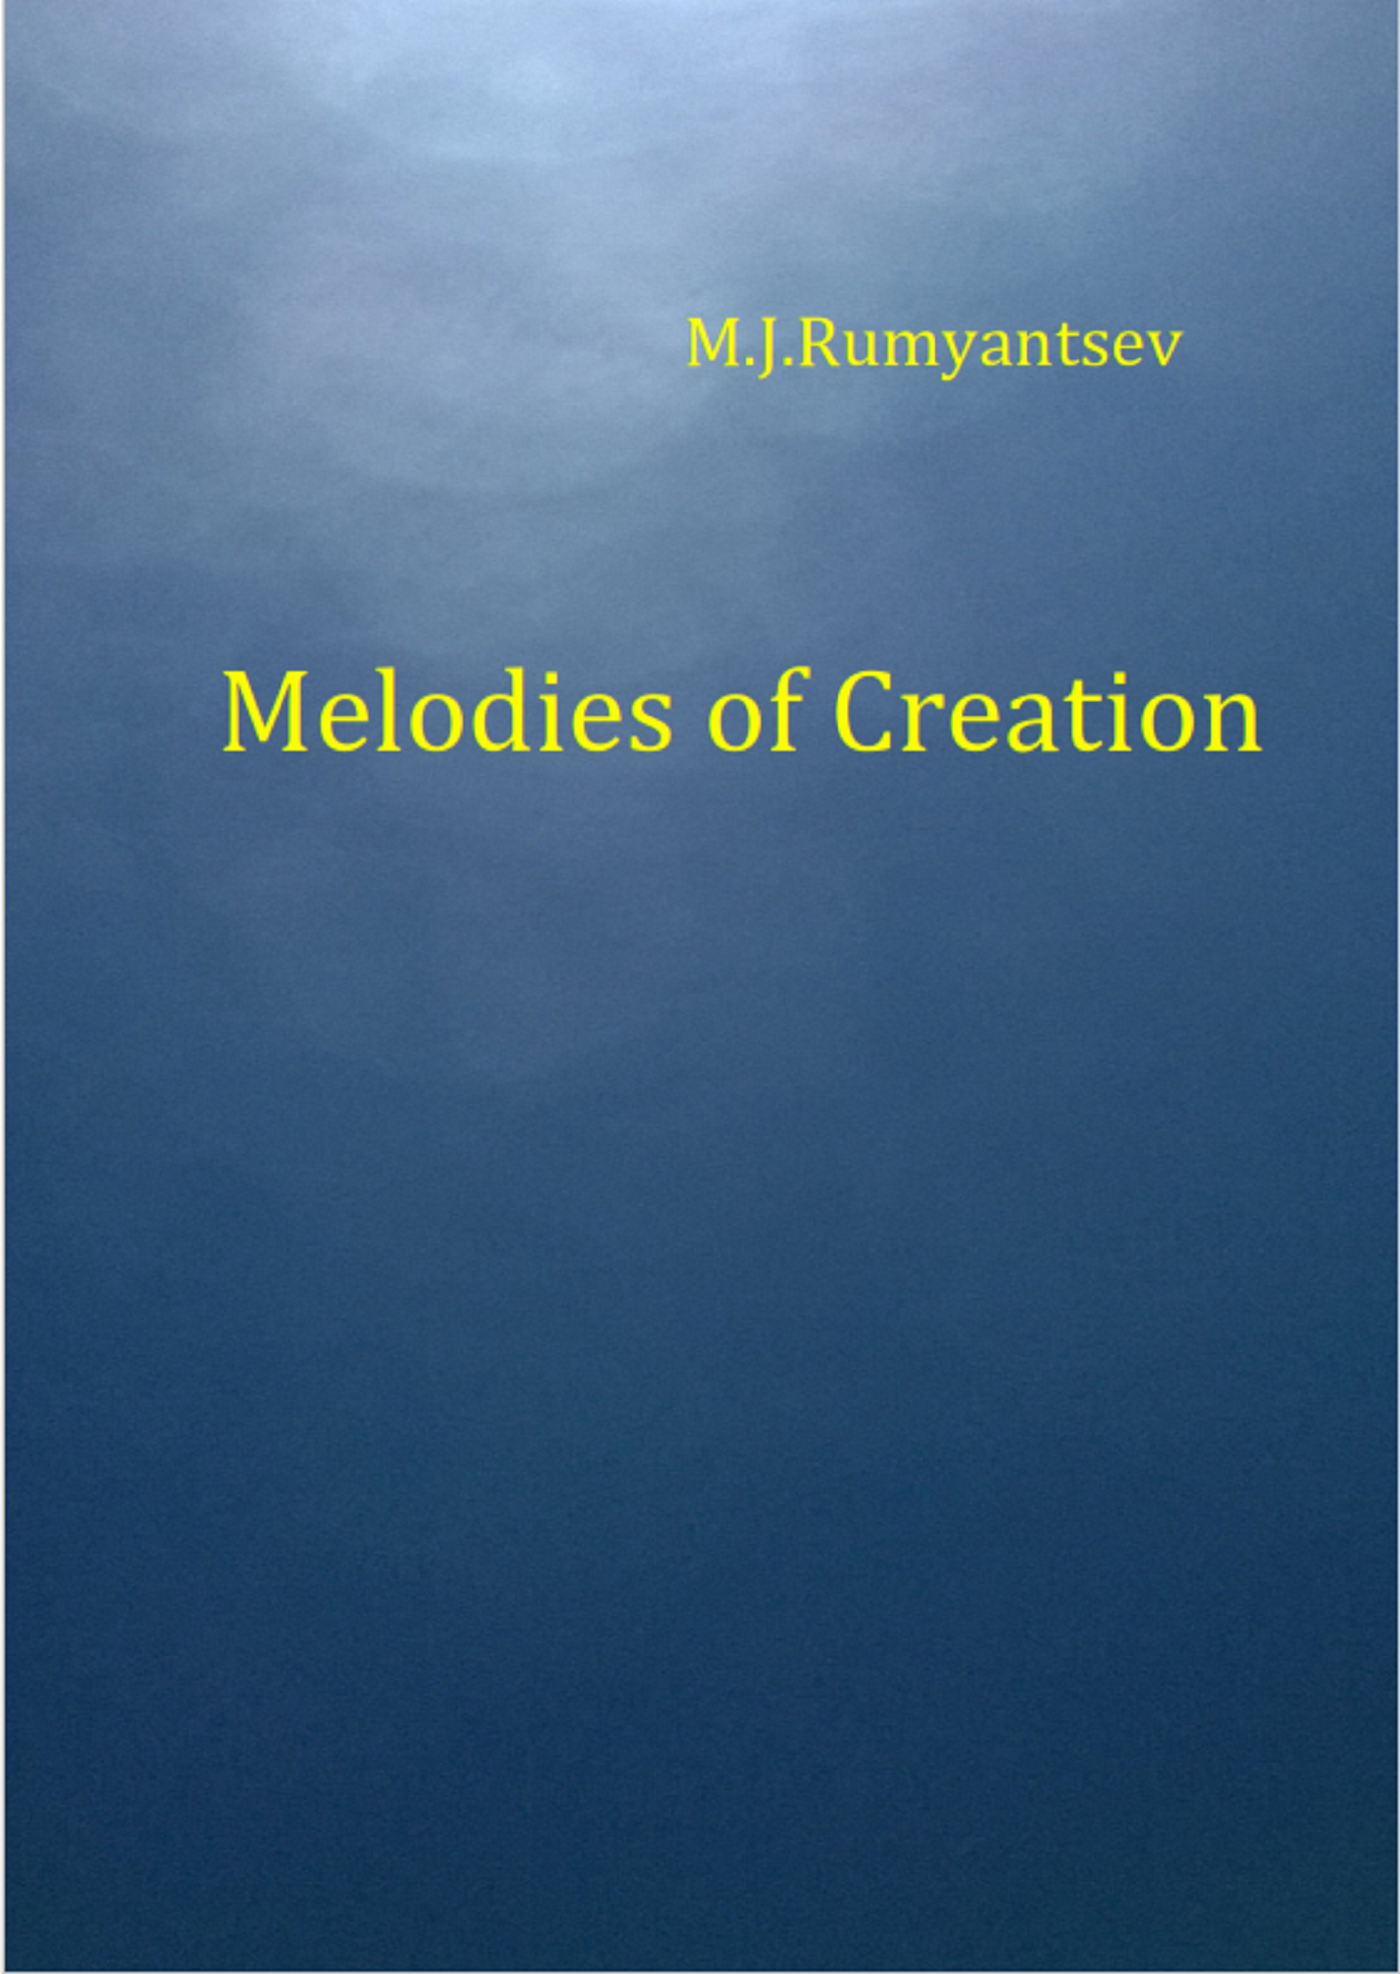 Melodies of Creation